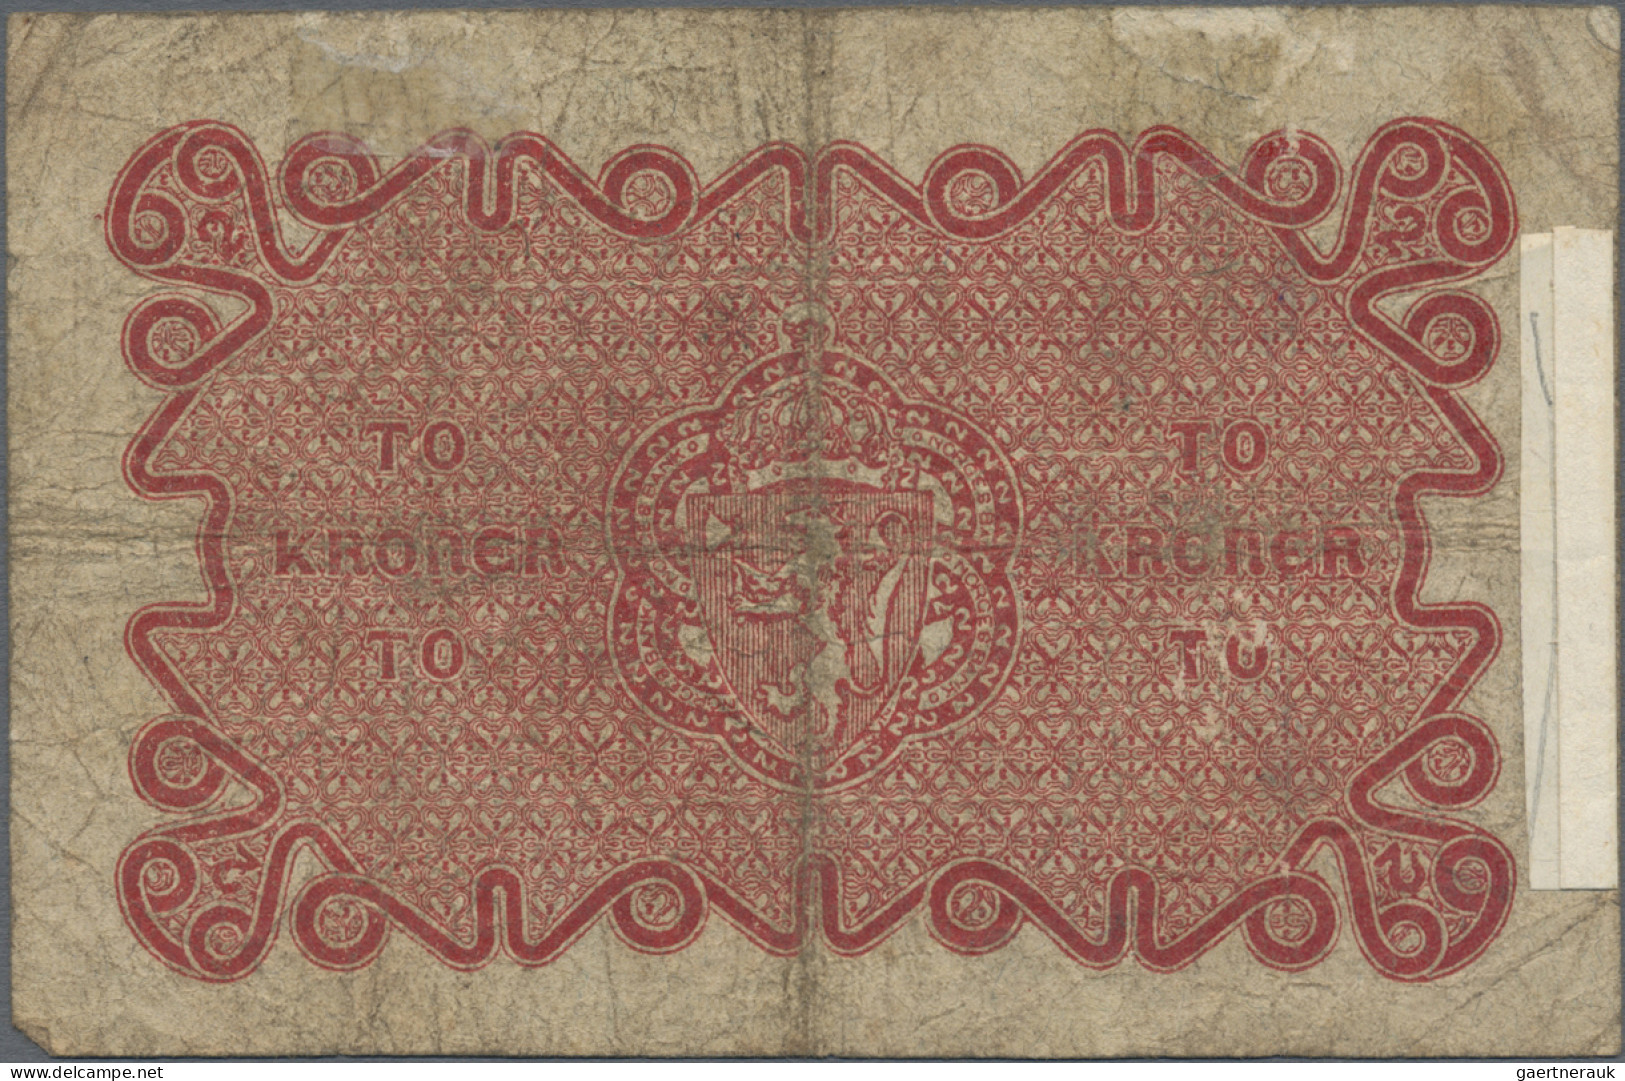 Norway: Norges Bank, lot with 7 banknotes, 1917-1967 series, with 2x 1, 2x 2, 5